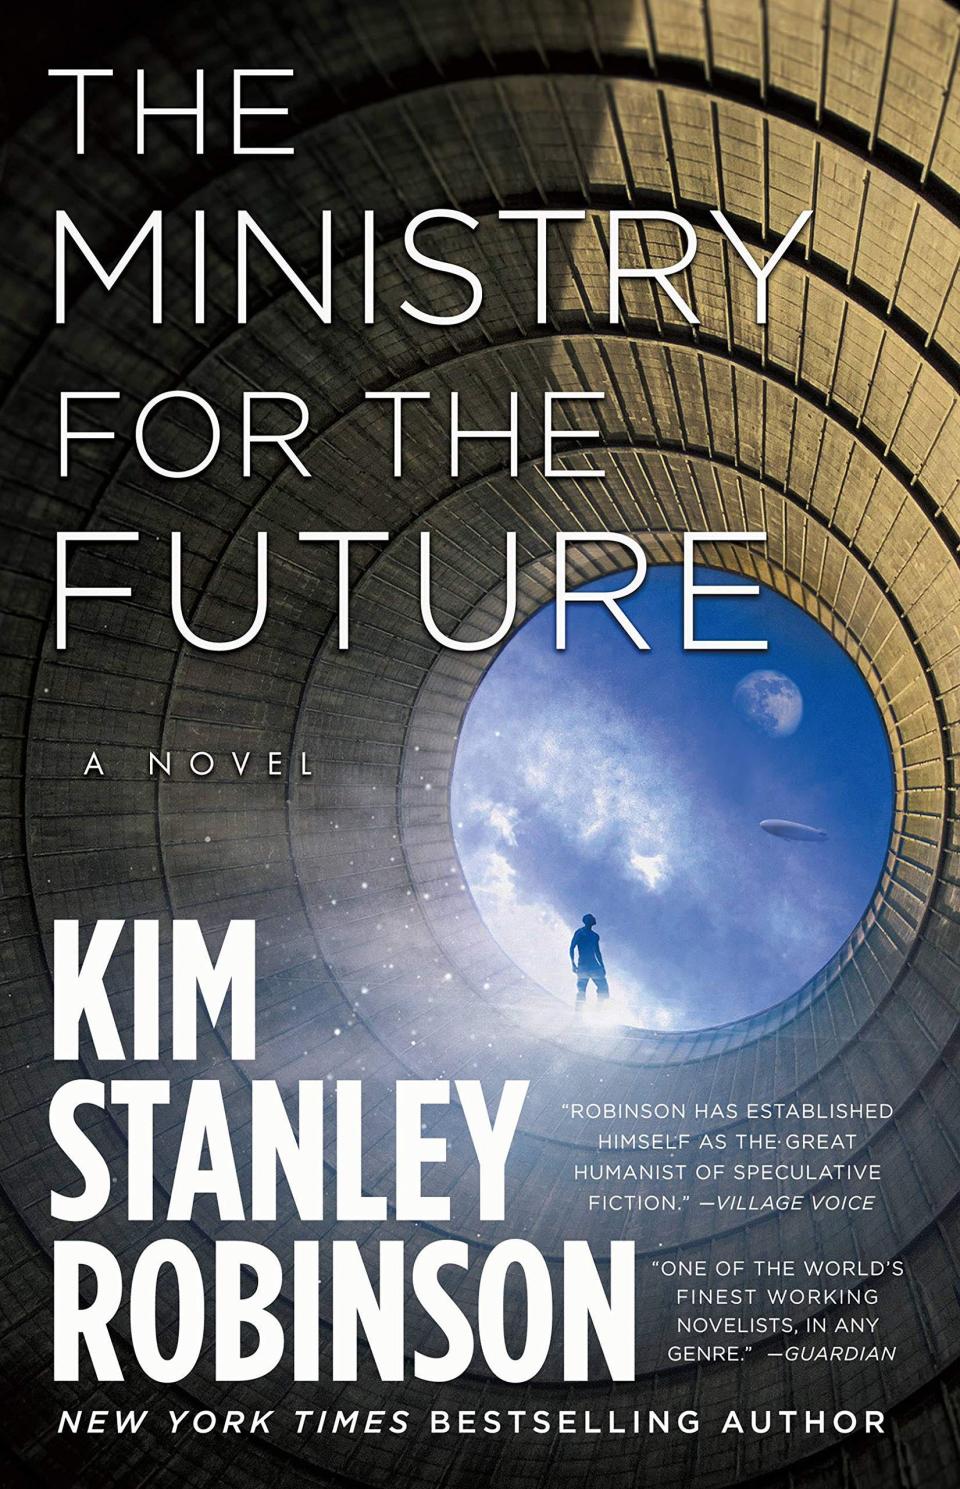 the cover of book The Ministry for the Future